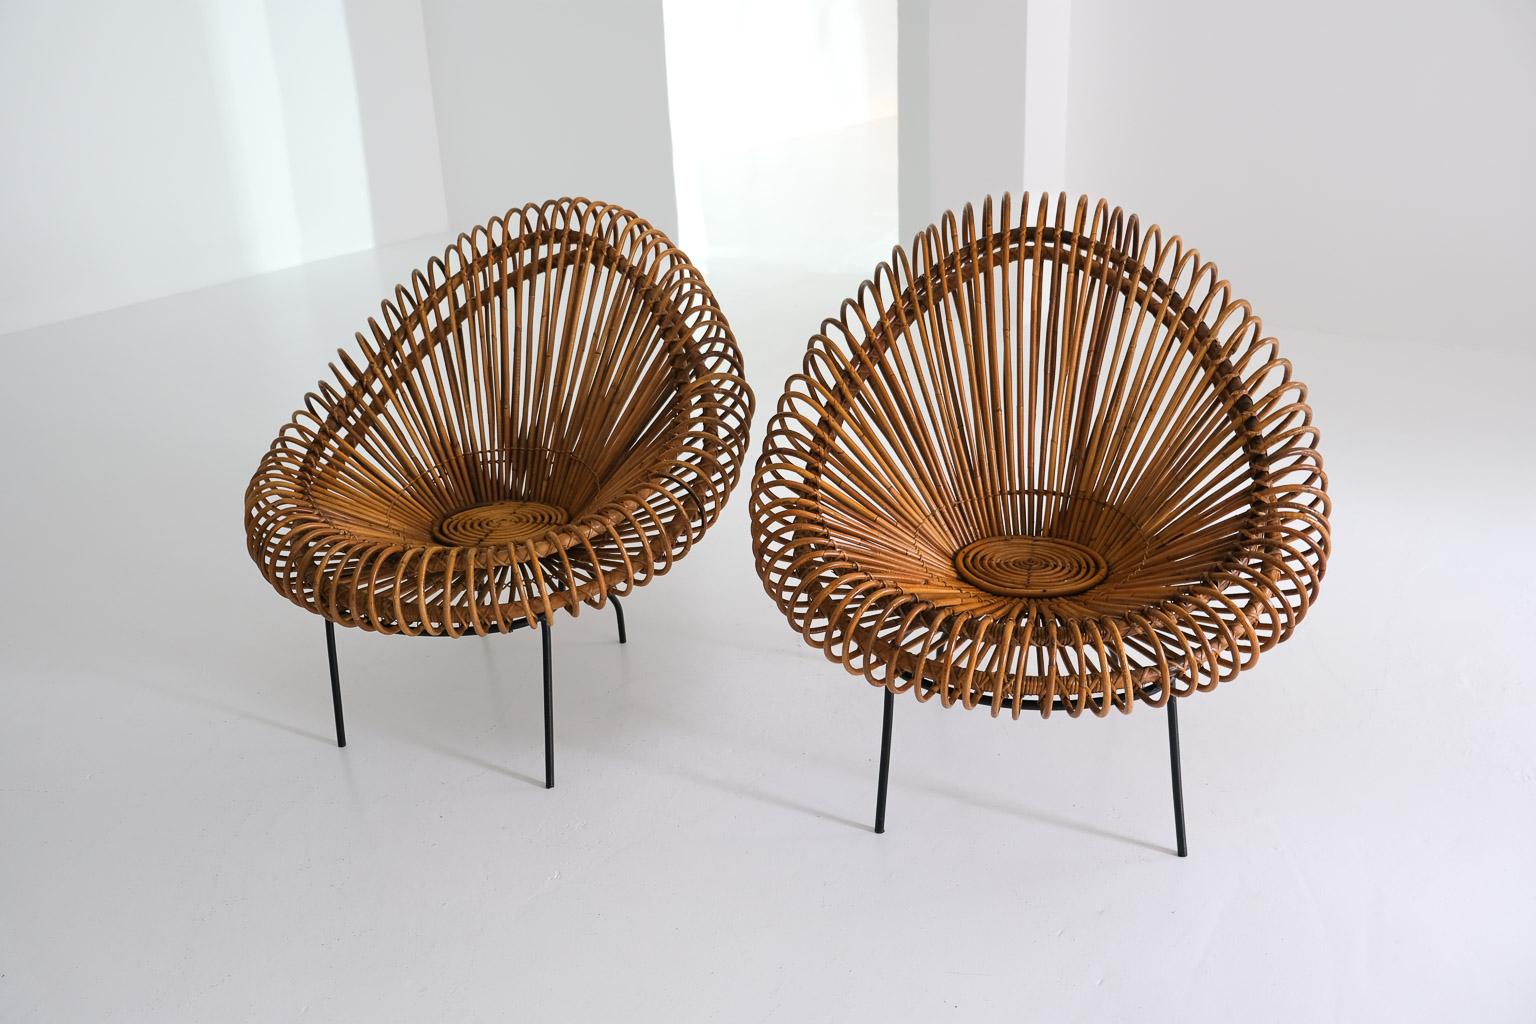 2 Basketware Lounge Chairs by Janine Abraham & Dirk Jan Rol for Edition Rougier In Good Condition For Sale In Frankfurt am Main, DE